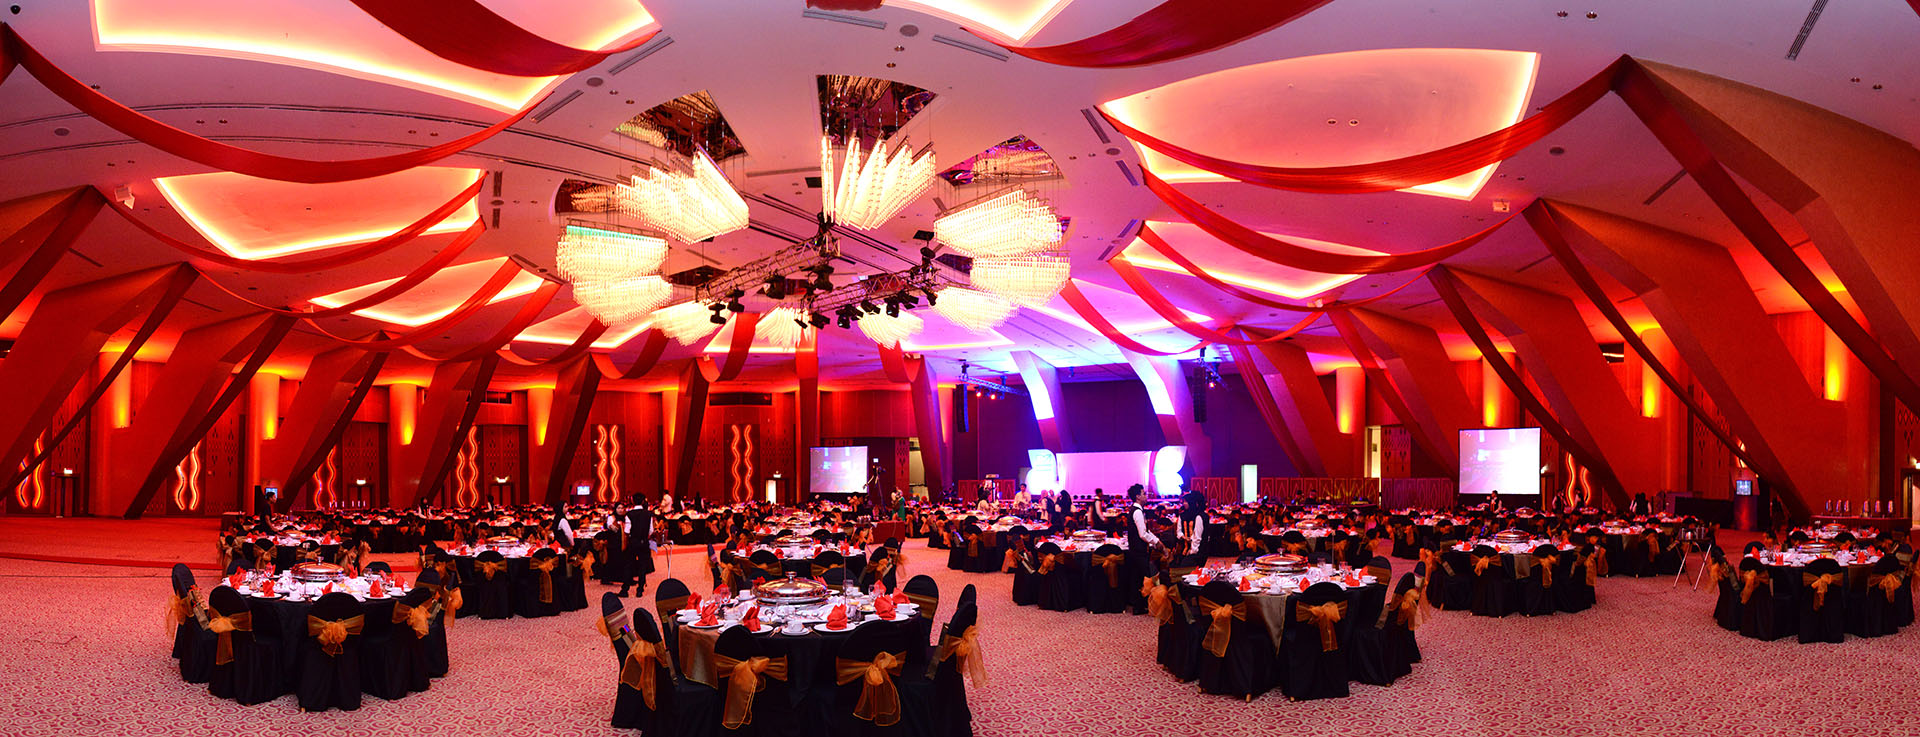 Event Decor: 3 Unique Ideas to Wow Your Attendees 